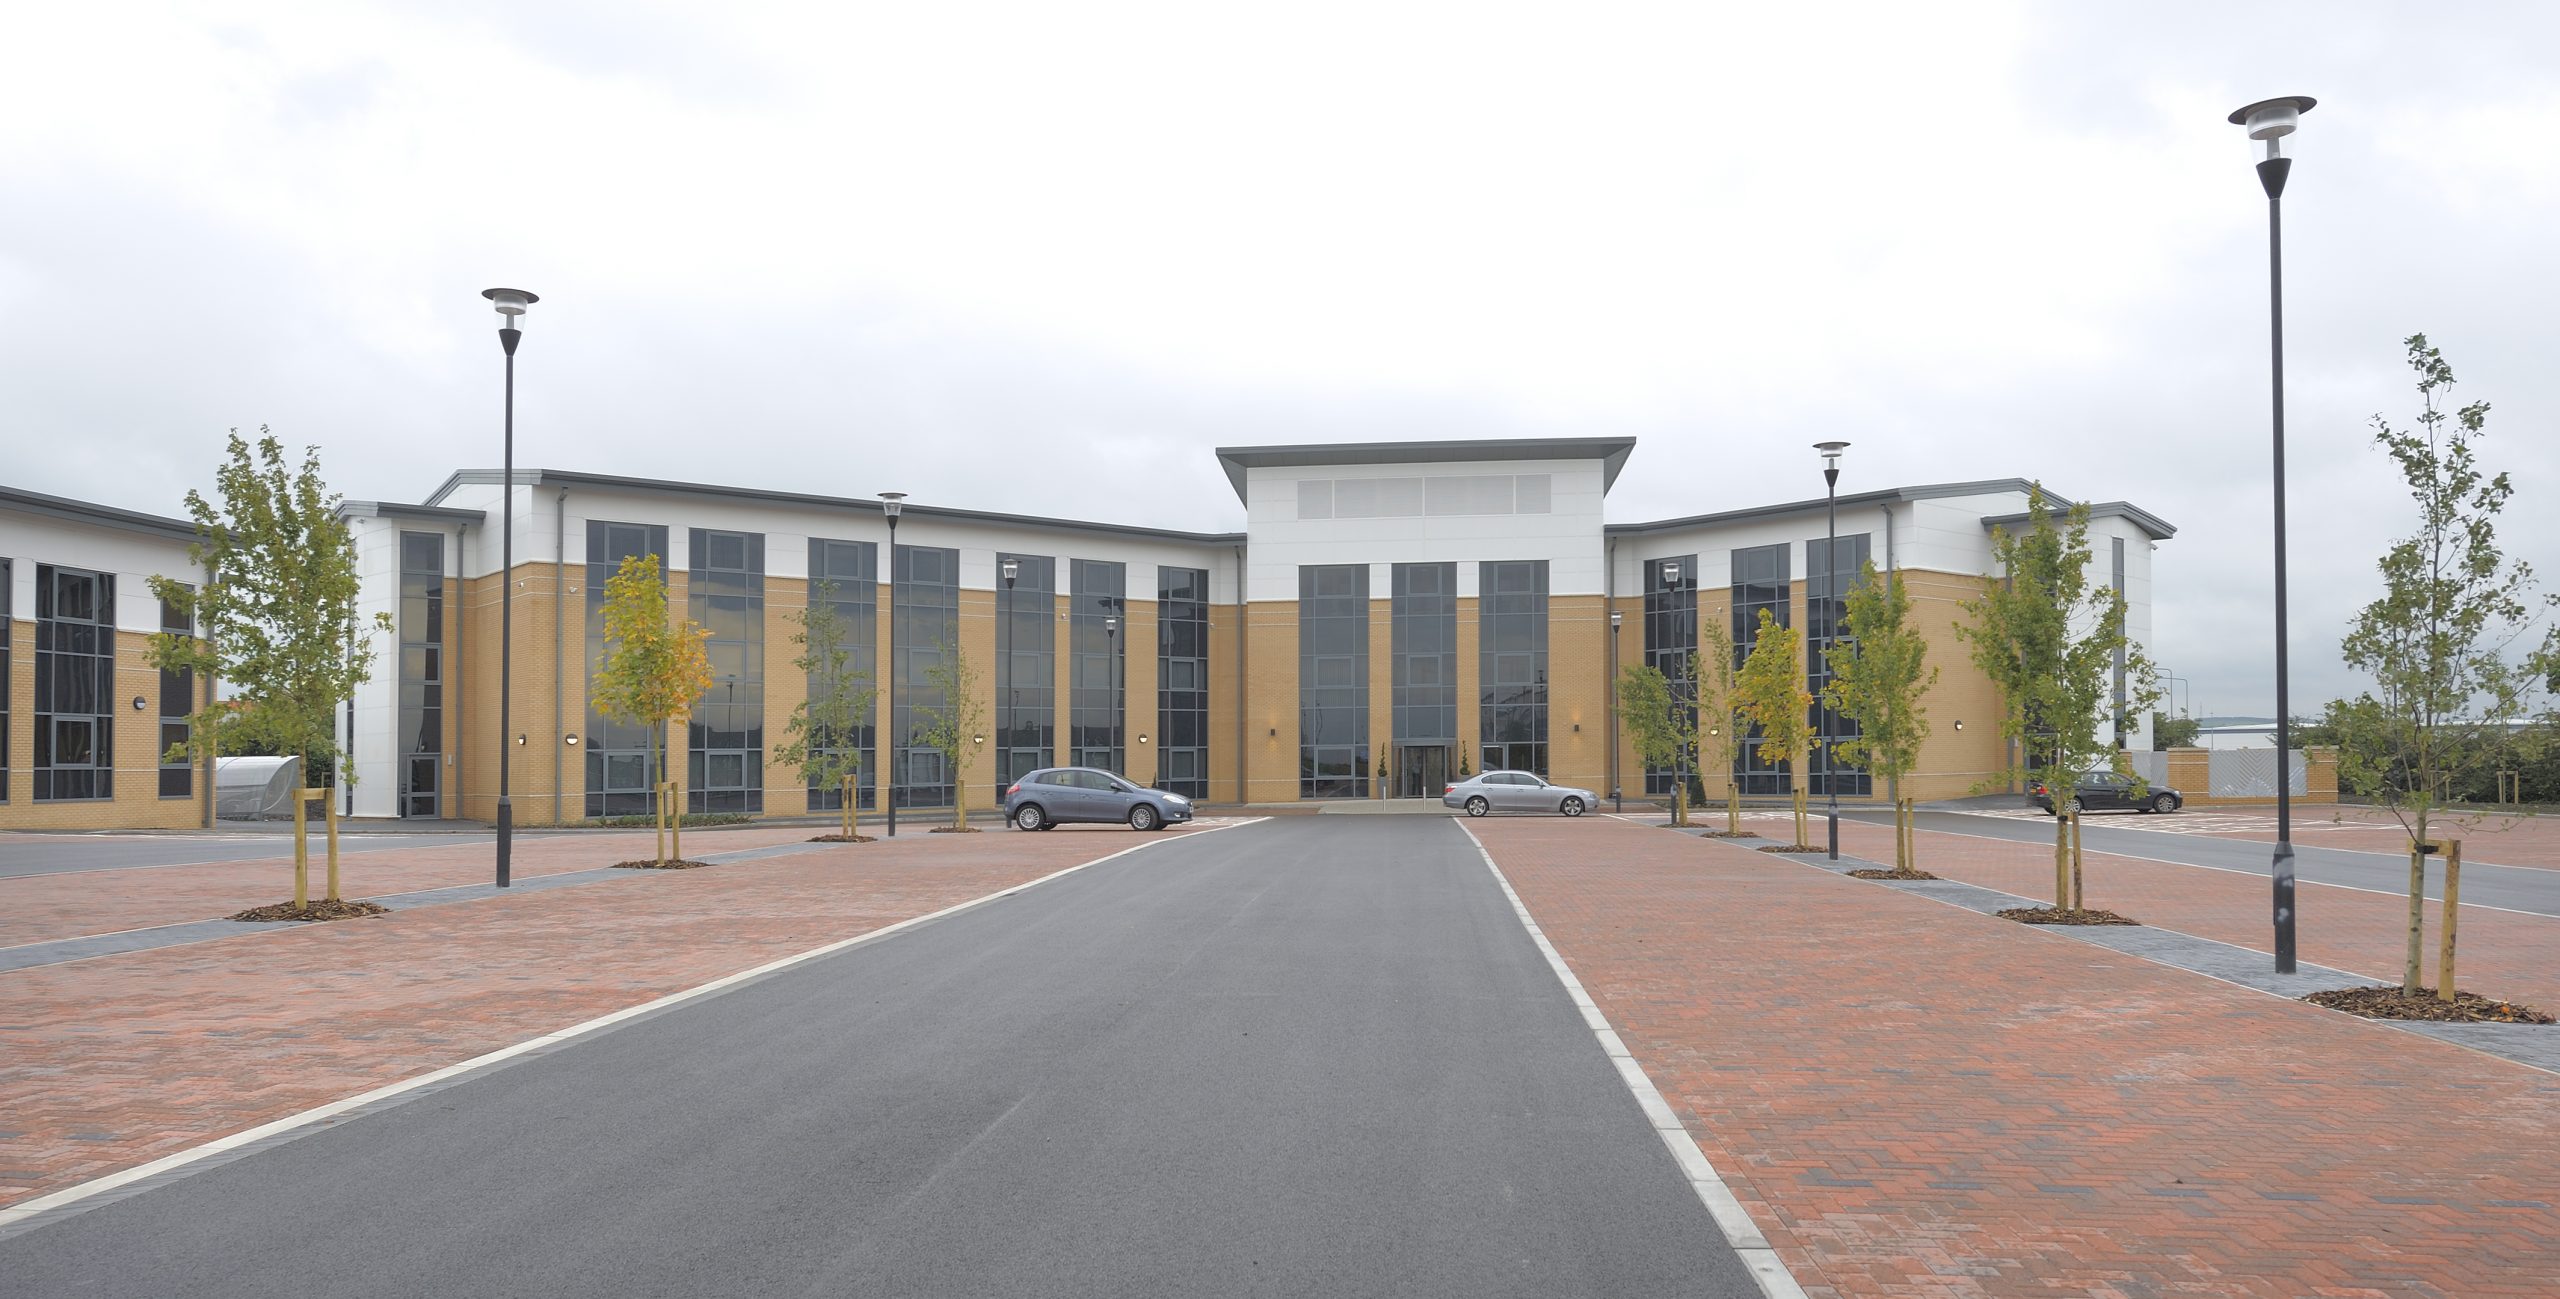 External image of Fusion House showing building and car park